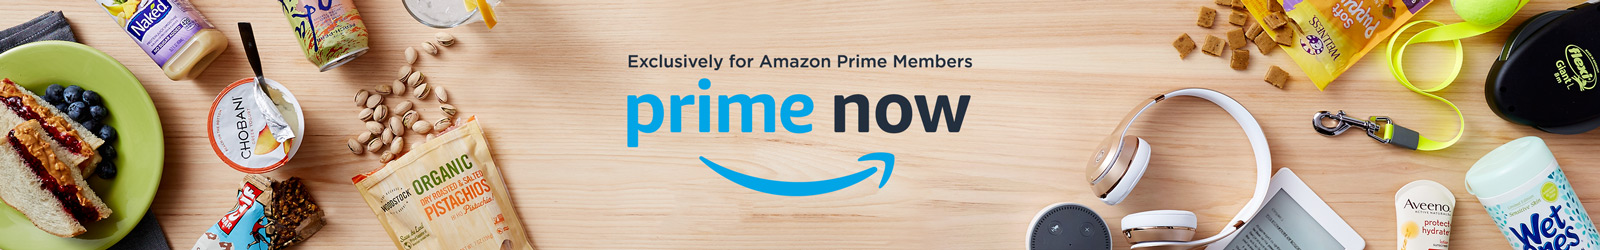 Get $10 off your first Amazon Prime Now order!